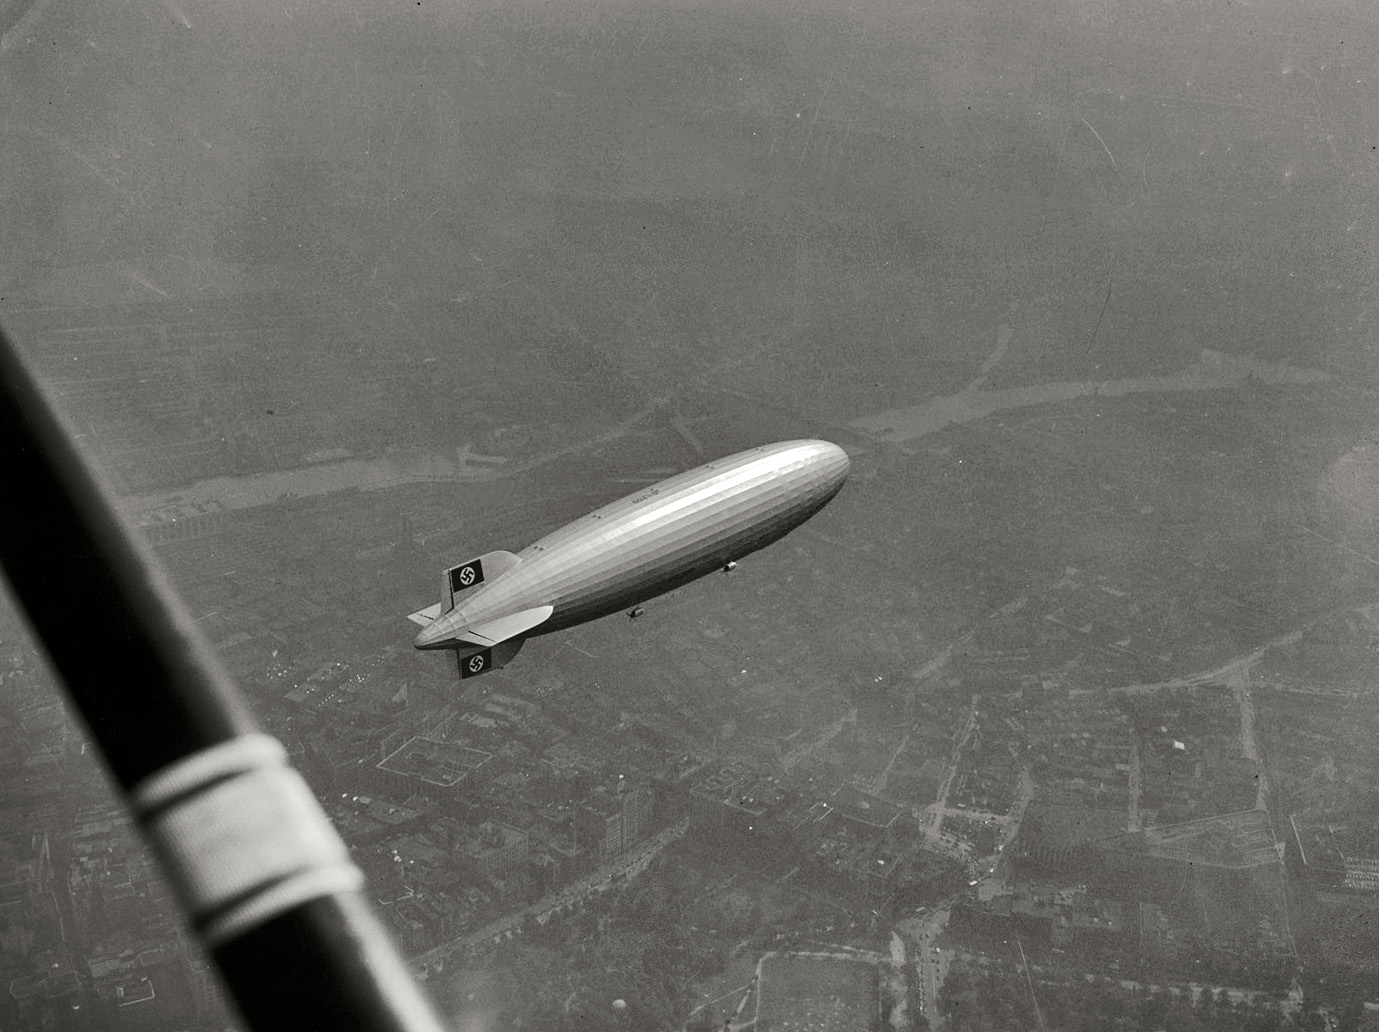 "The Hindenburg over Boston Common, 1936." Sunday marked the 75th anniversary of the German airship's explosion at Lakehurst, New Jersey. Medium format acetate negative by Leslie Jones. Boston Public Library. View full size.